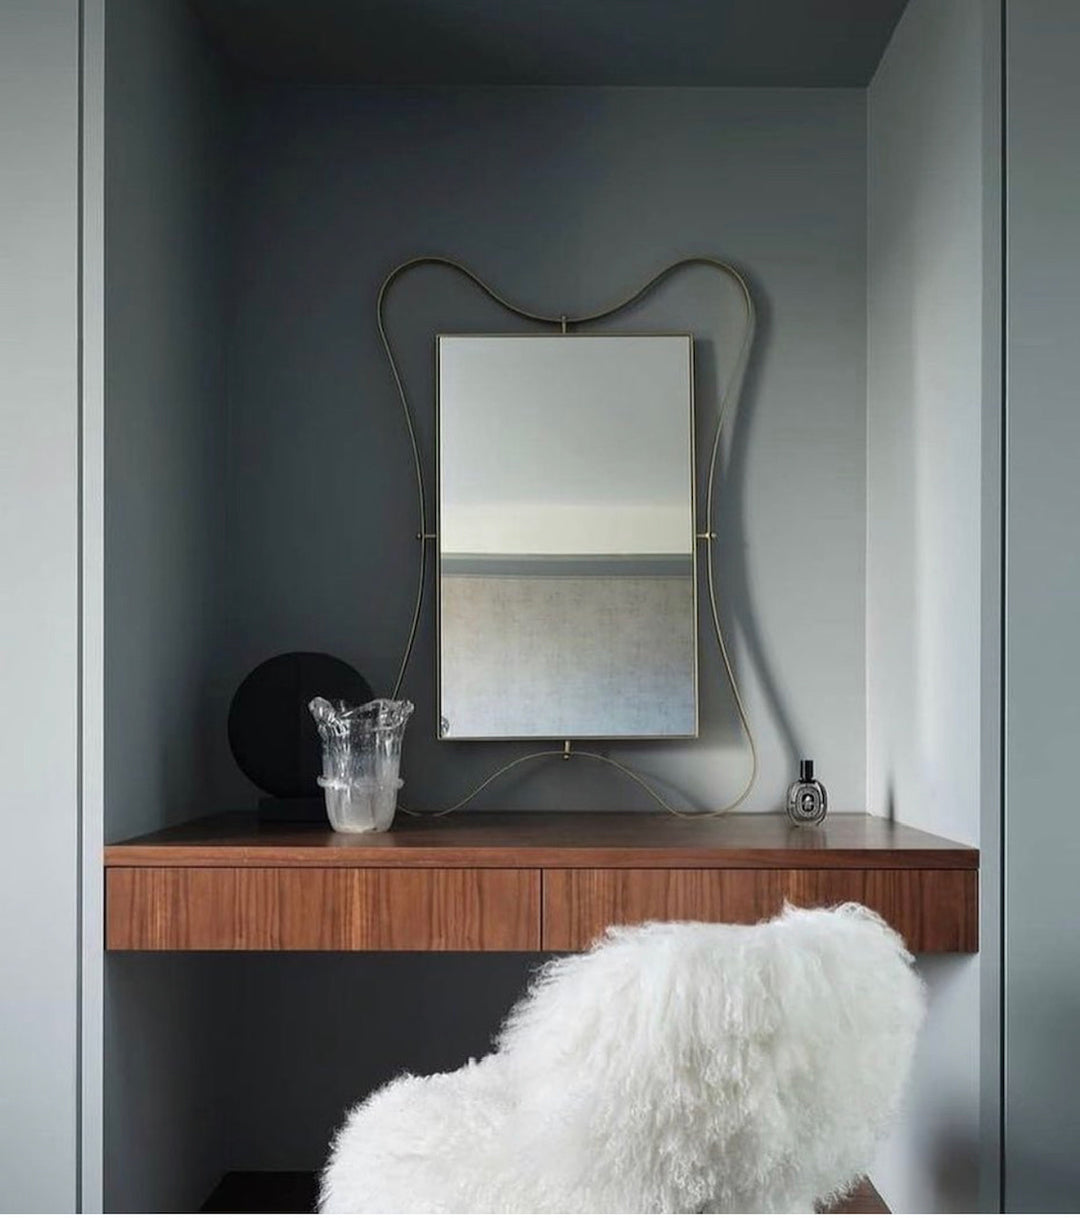 Romance was born - How to create beauty and mystique with mirrors